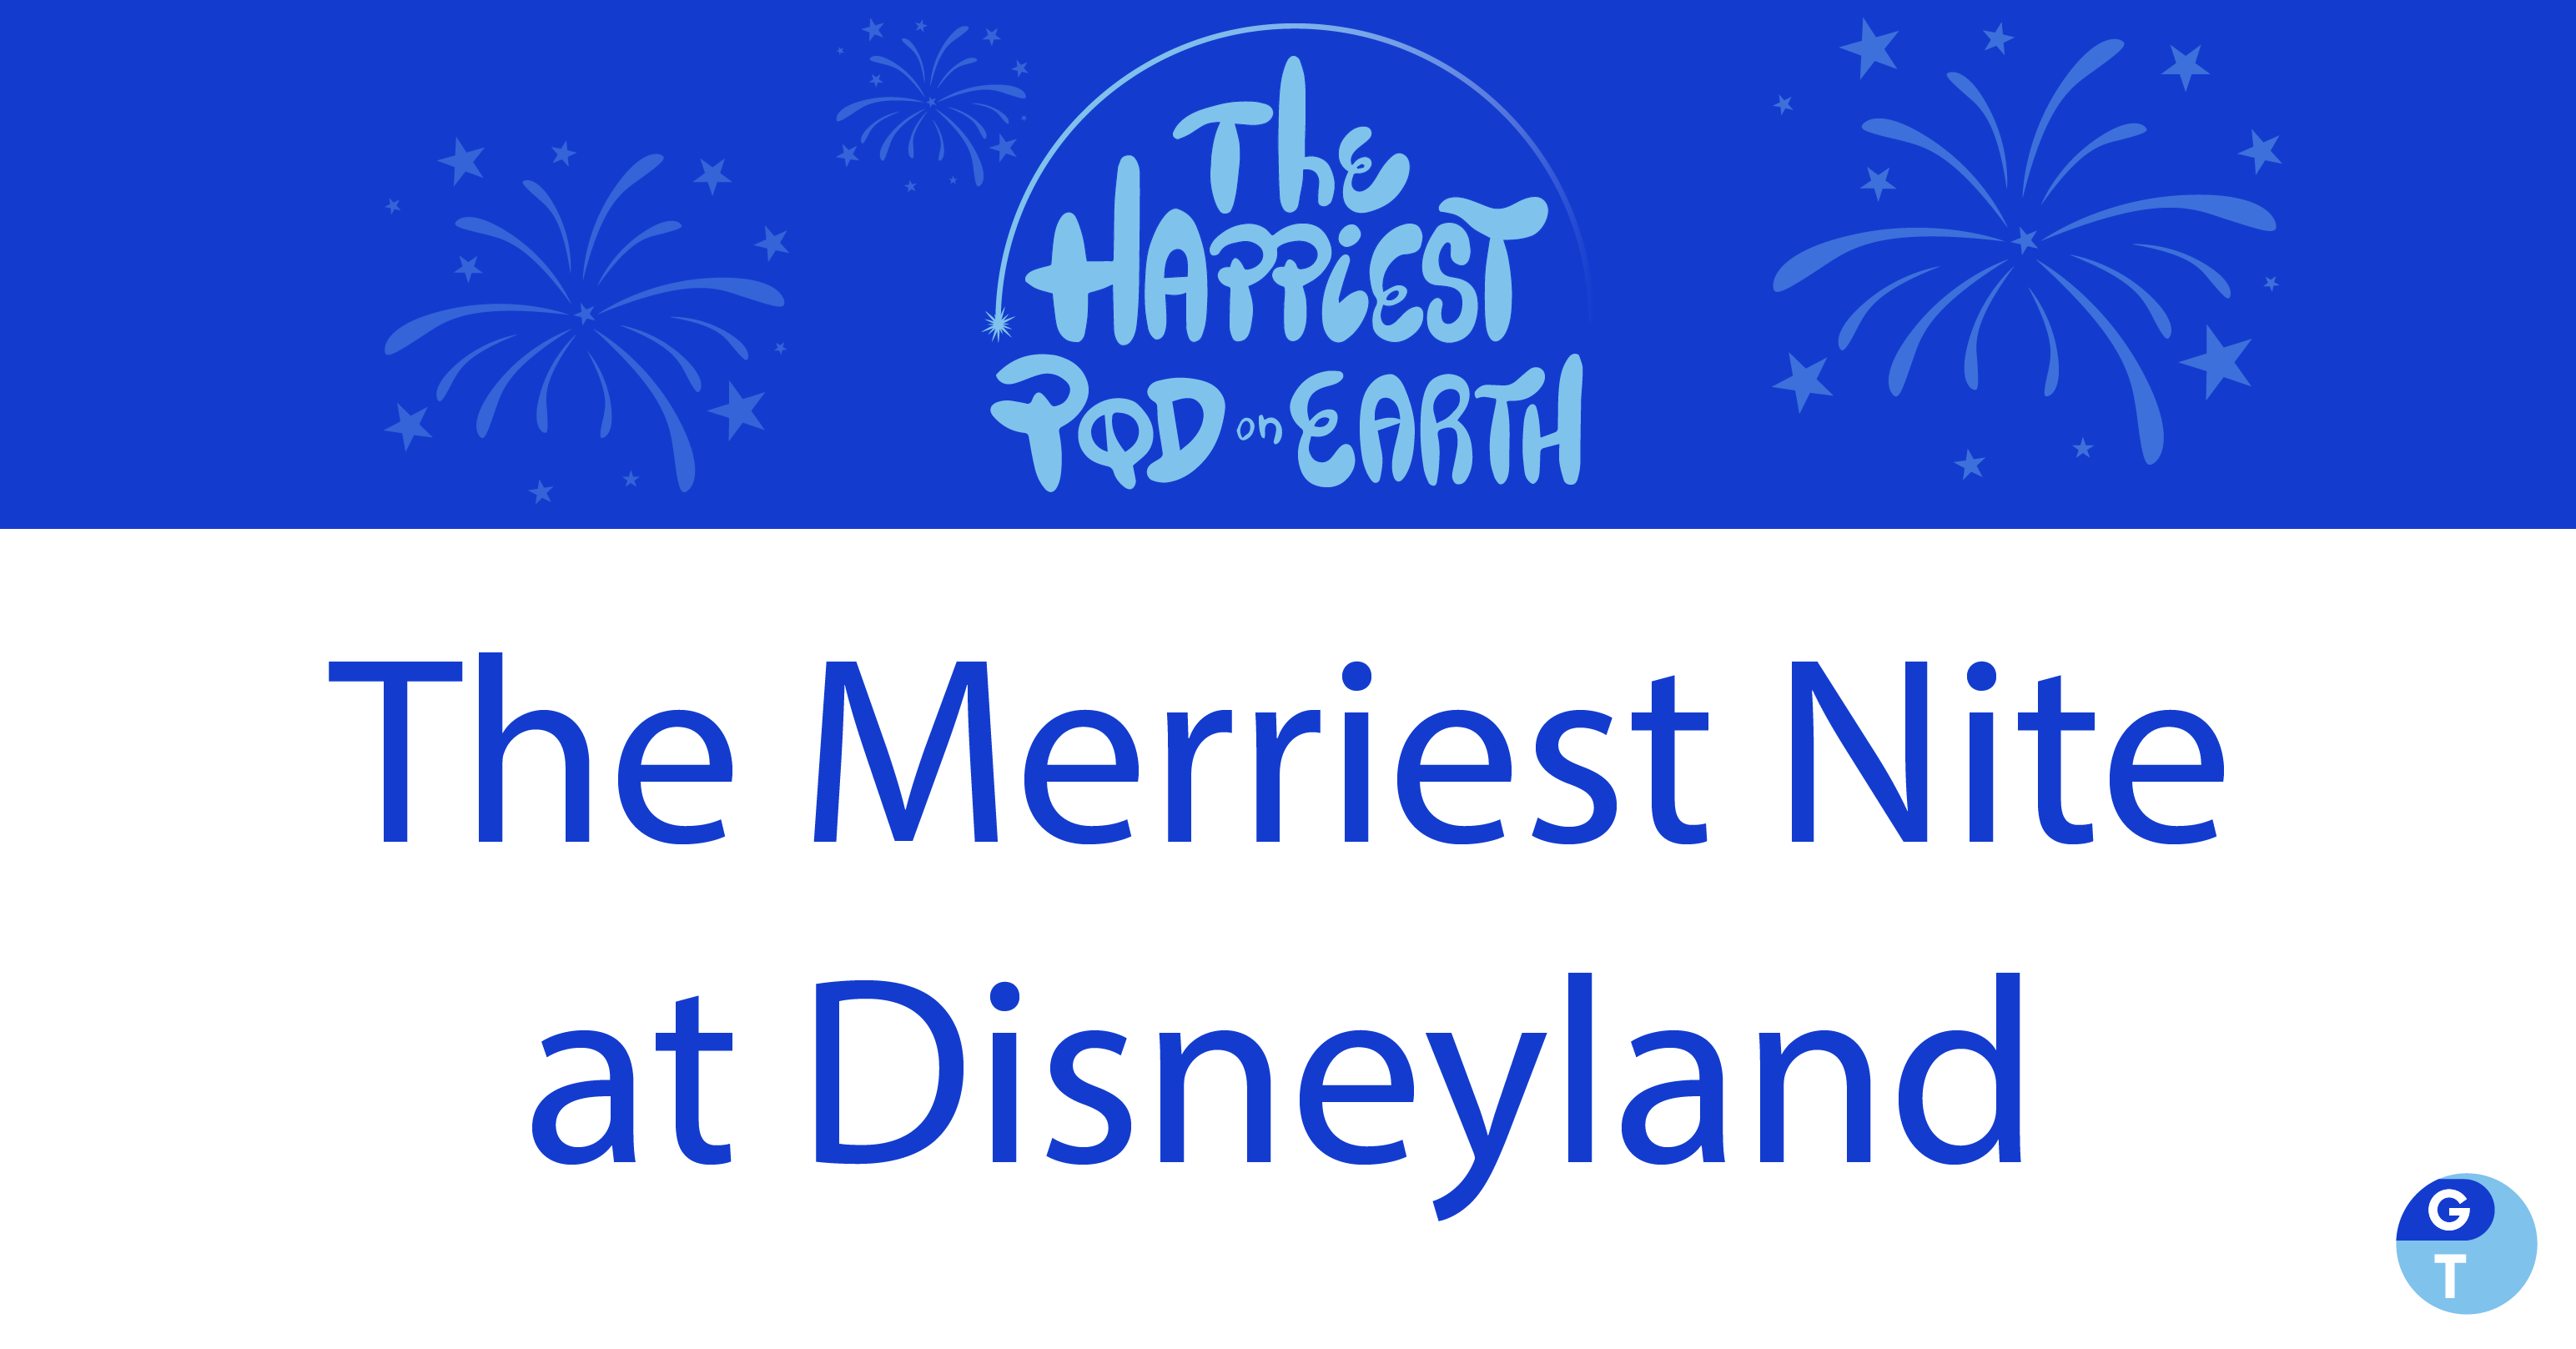 podcast logo of fireworks and podcast name "The Happiest Pod On Earth" with episode text that reads "The Merriest Nite at Disneyland"